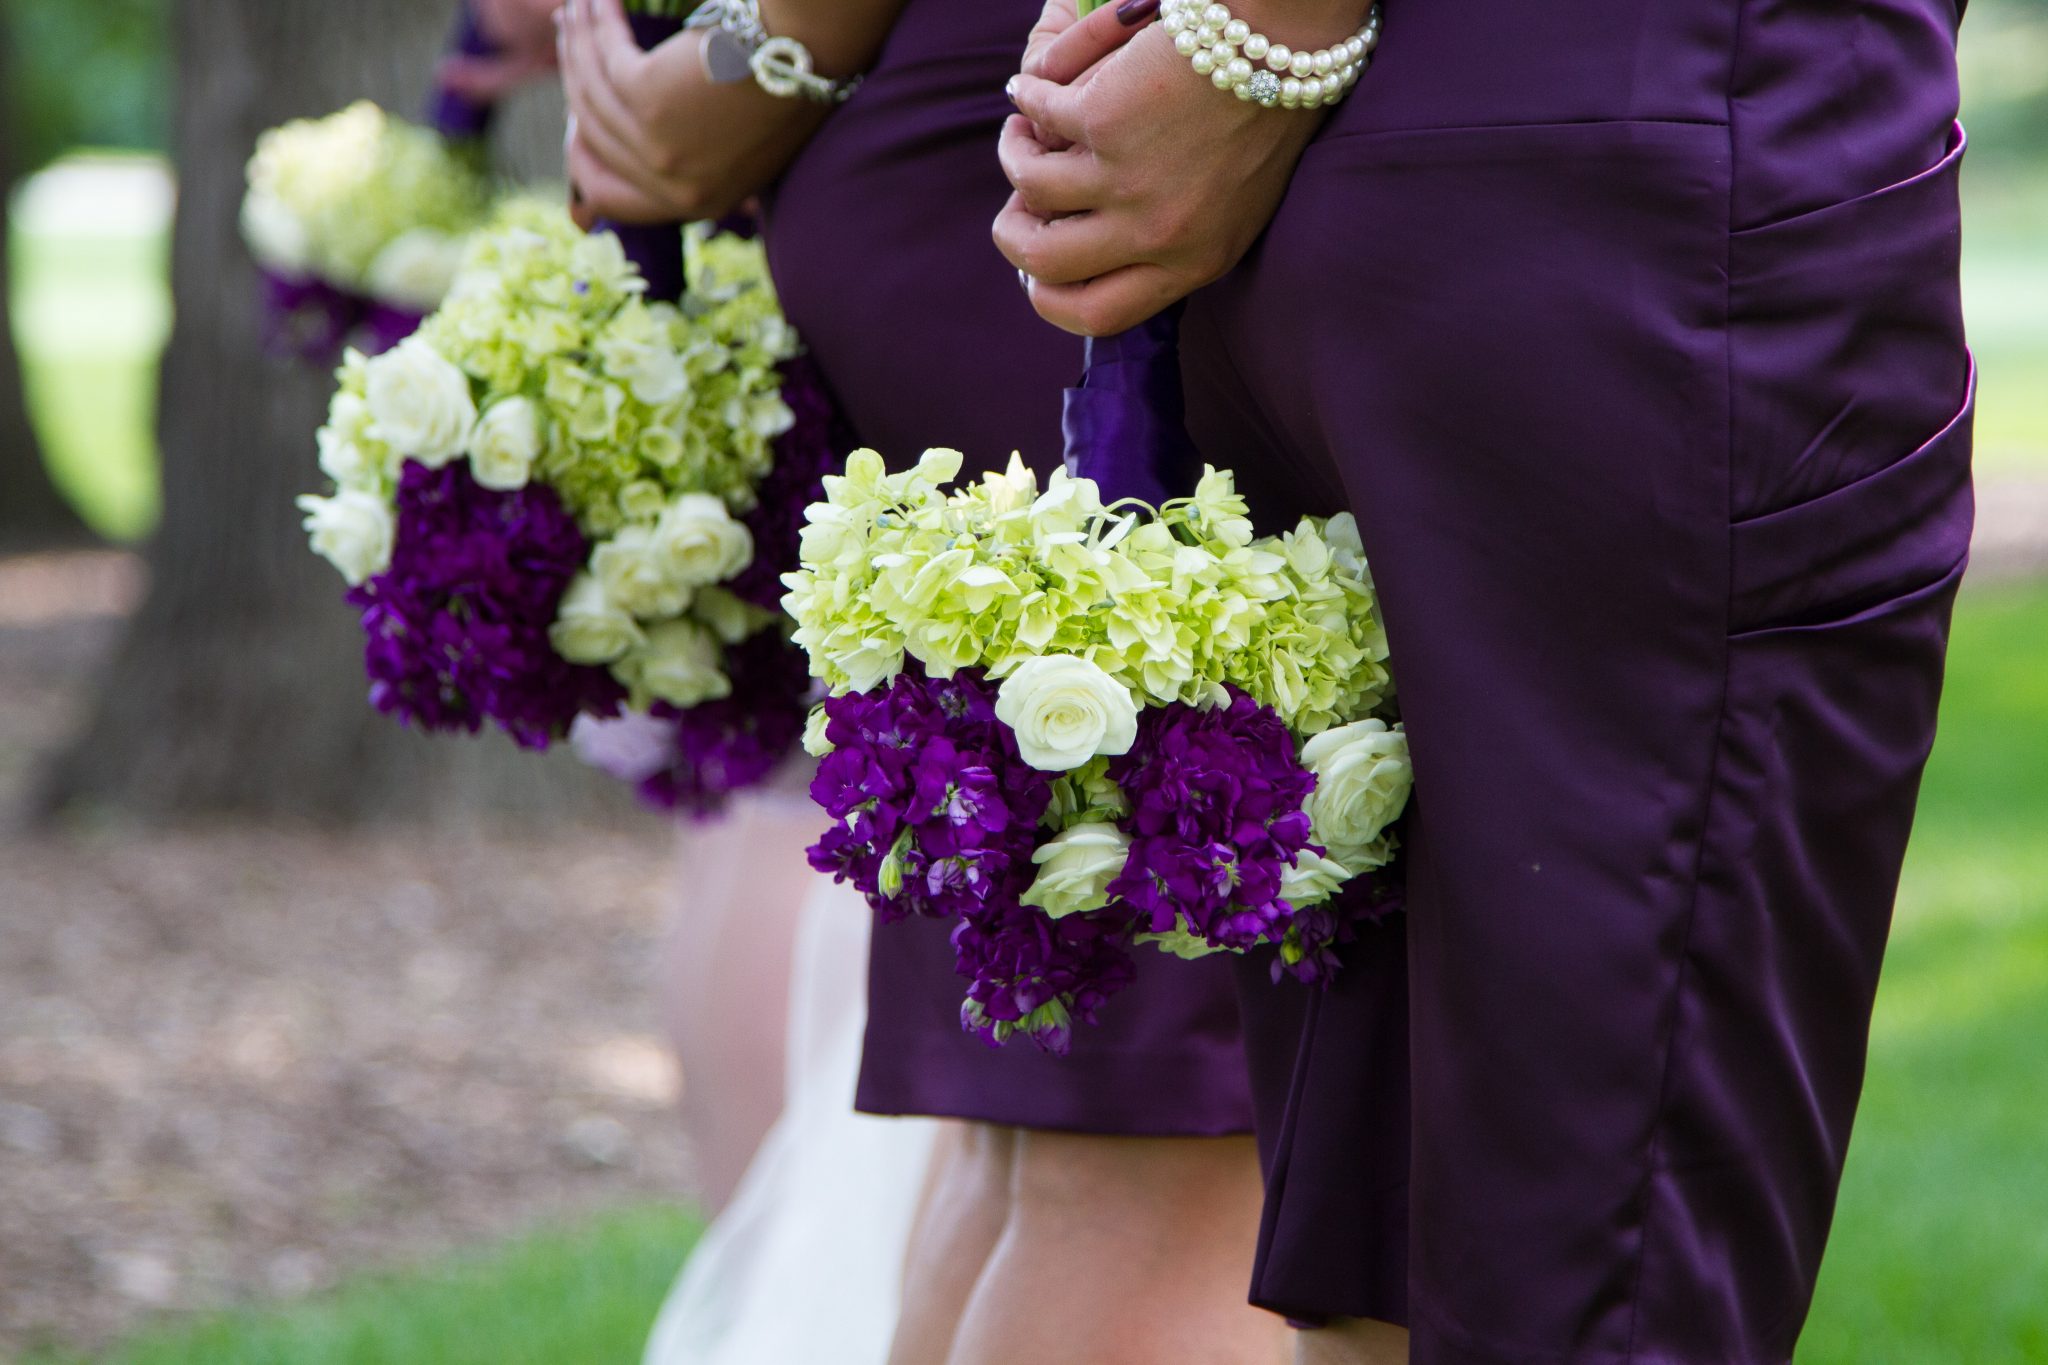 Lime green hydrangea make these bouquets pop against purple dresses. Purple stock and white roses complete the bouquets.